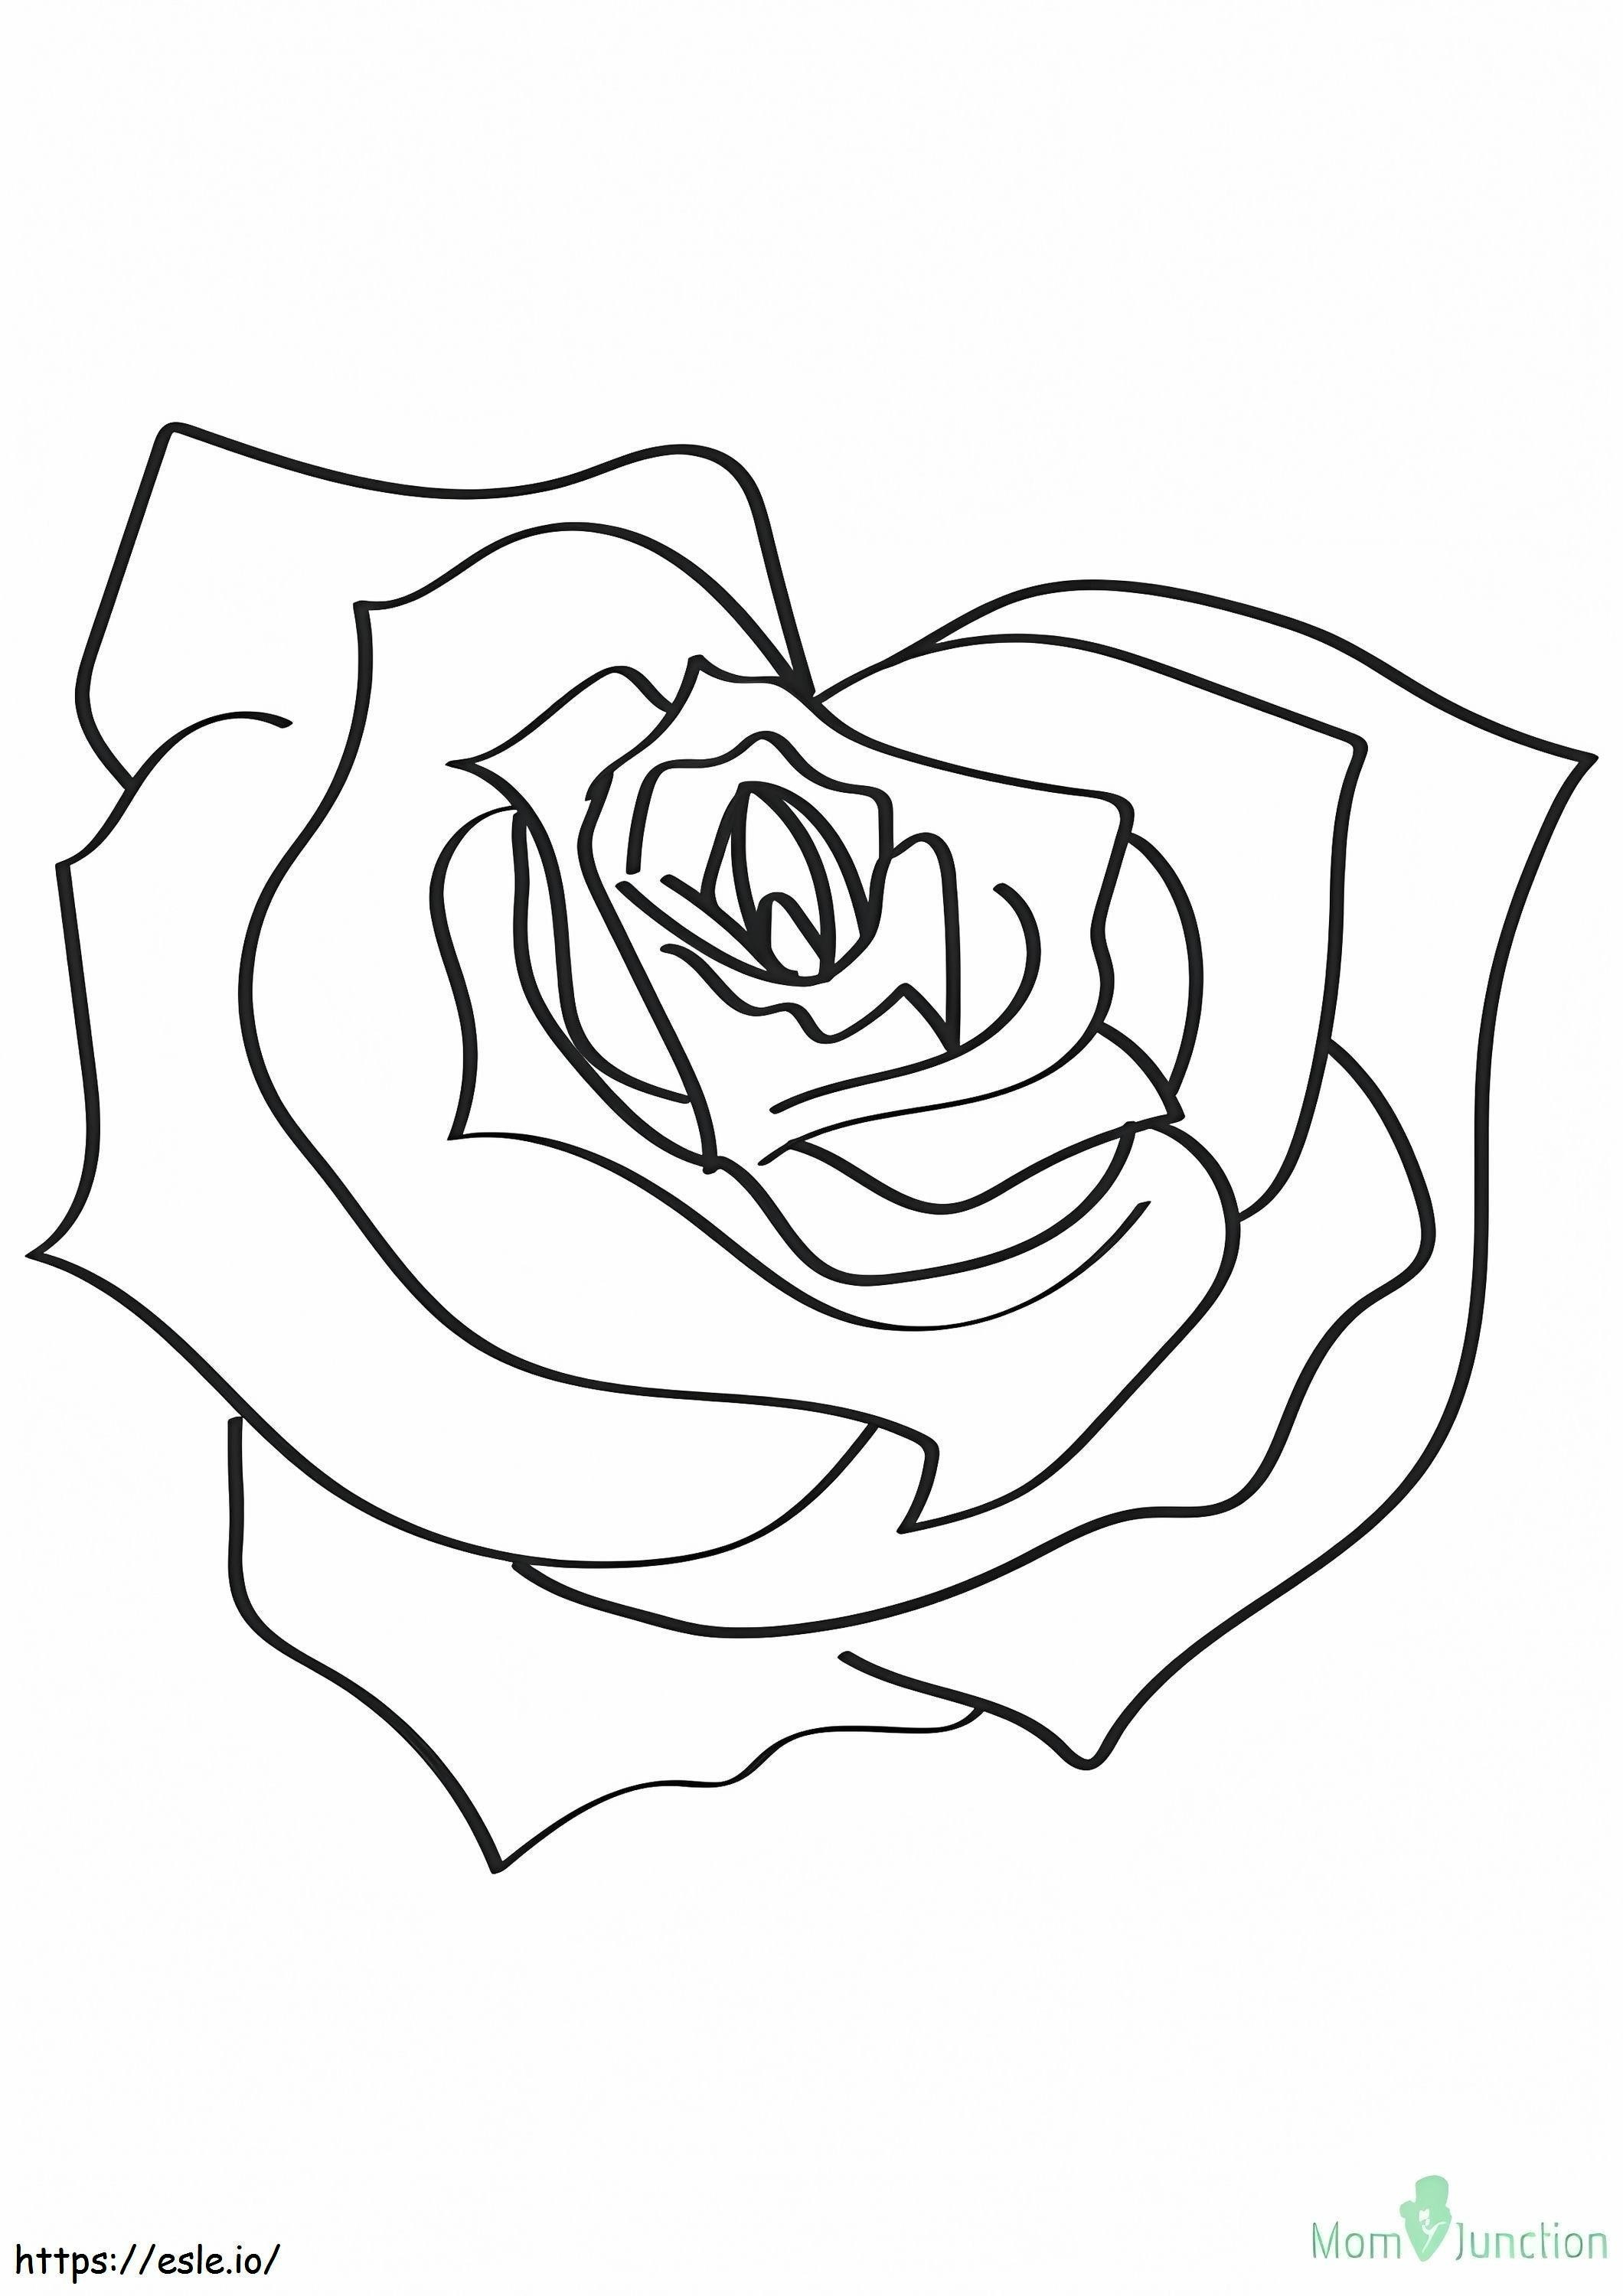 1526201737 The Heart Shaped Rose 16 A4 coloring page